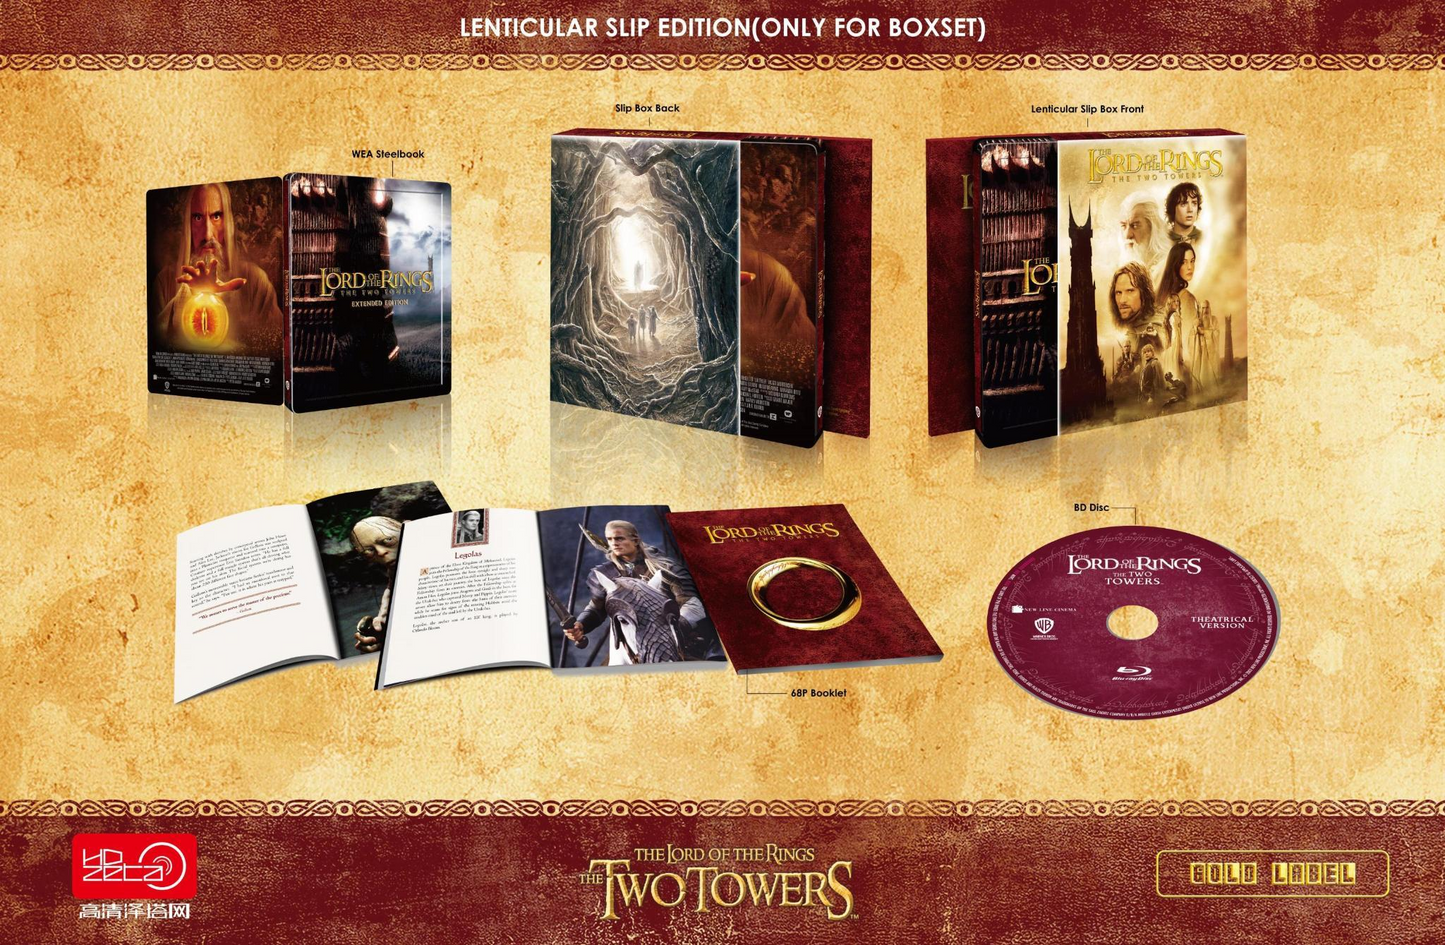 The Lord Of The Rings Trilogy 4K Blu-ray Steelbook HDZeta Exclusive Gold Label Triple Box Set